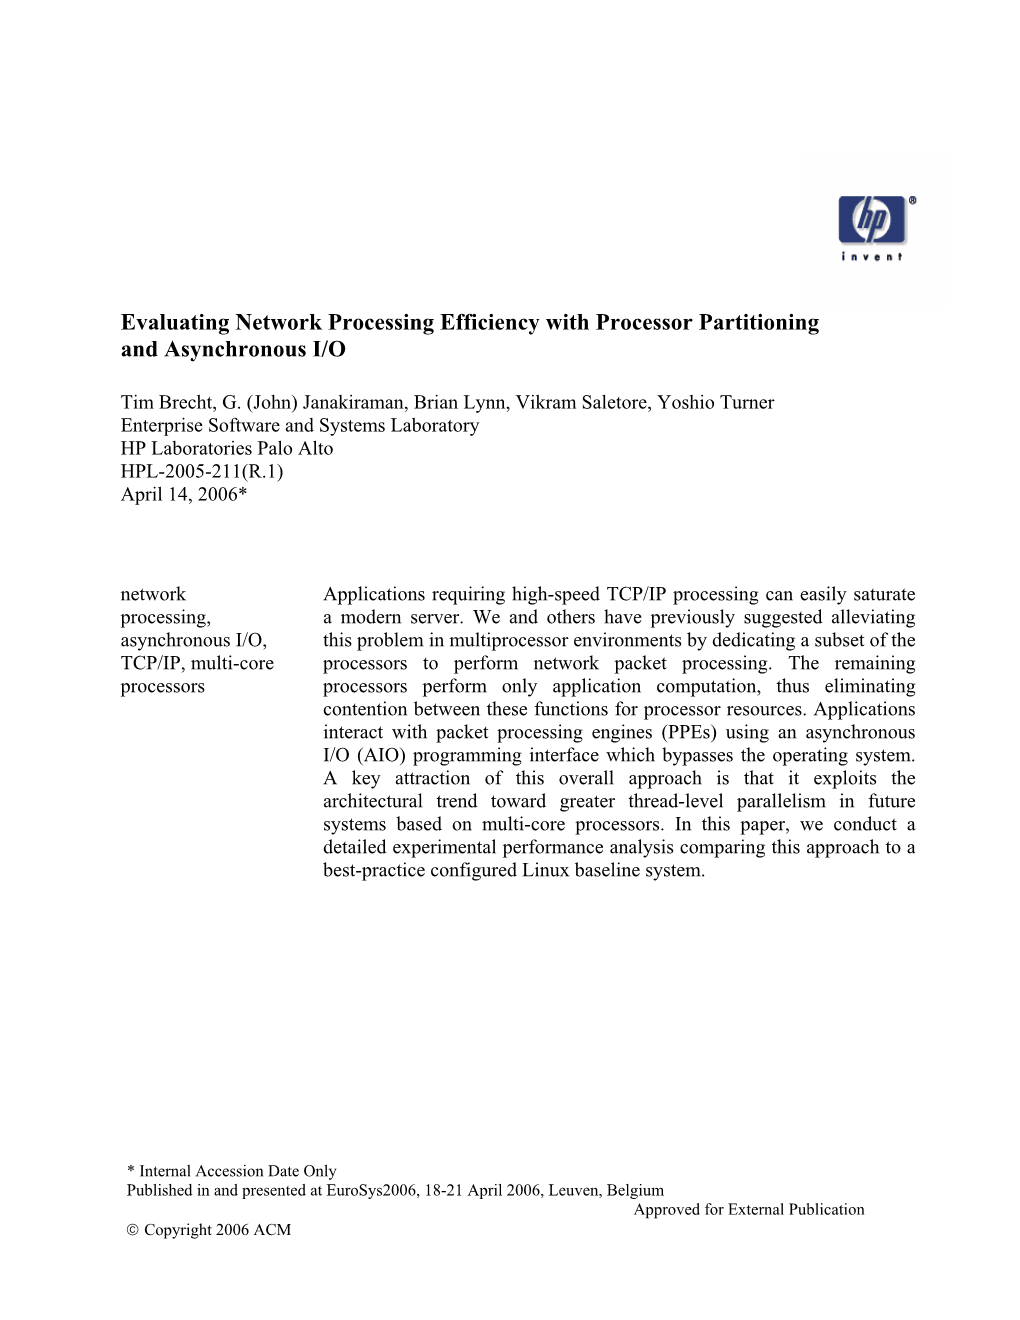 Evaluating Network Processing Efficiency with Processor Partitioning and Asynchronous I/O